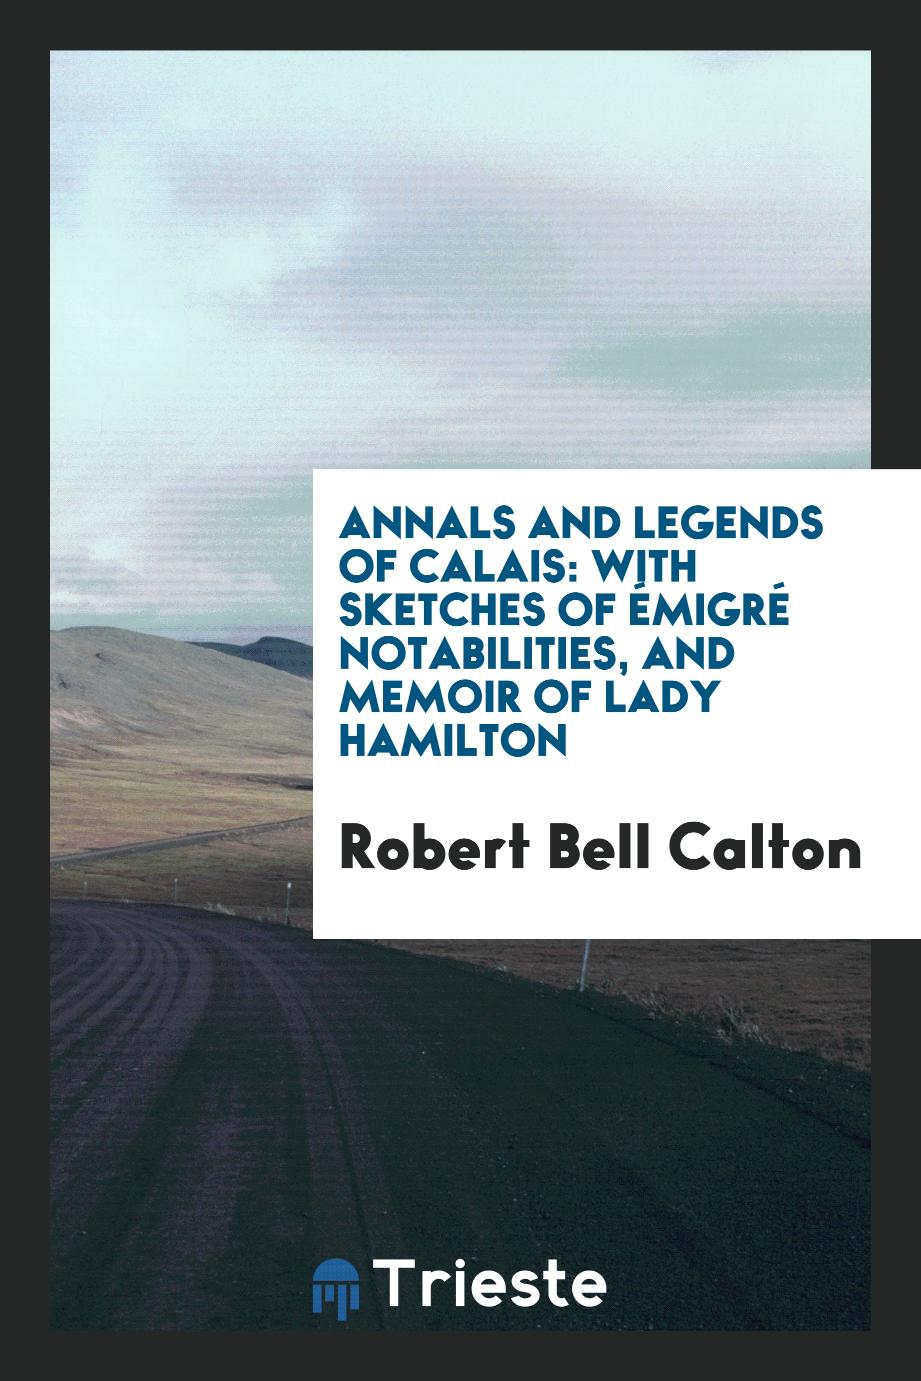 Annals and Legends of Calais: With Sketches of Émigré Notabilities, and Memoir of Lady Hamilton